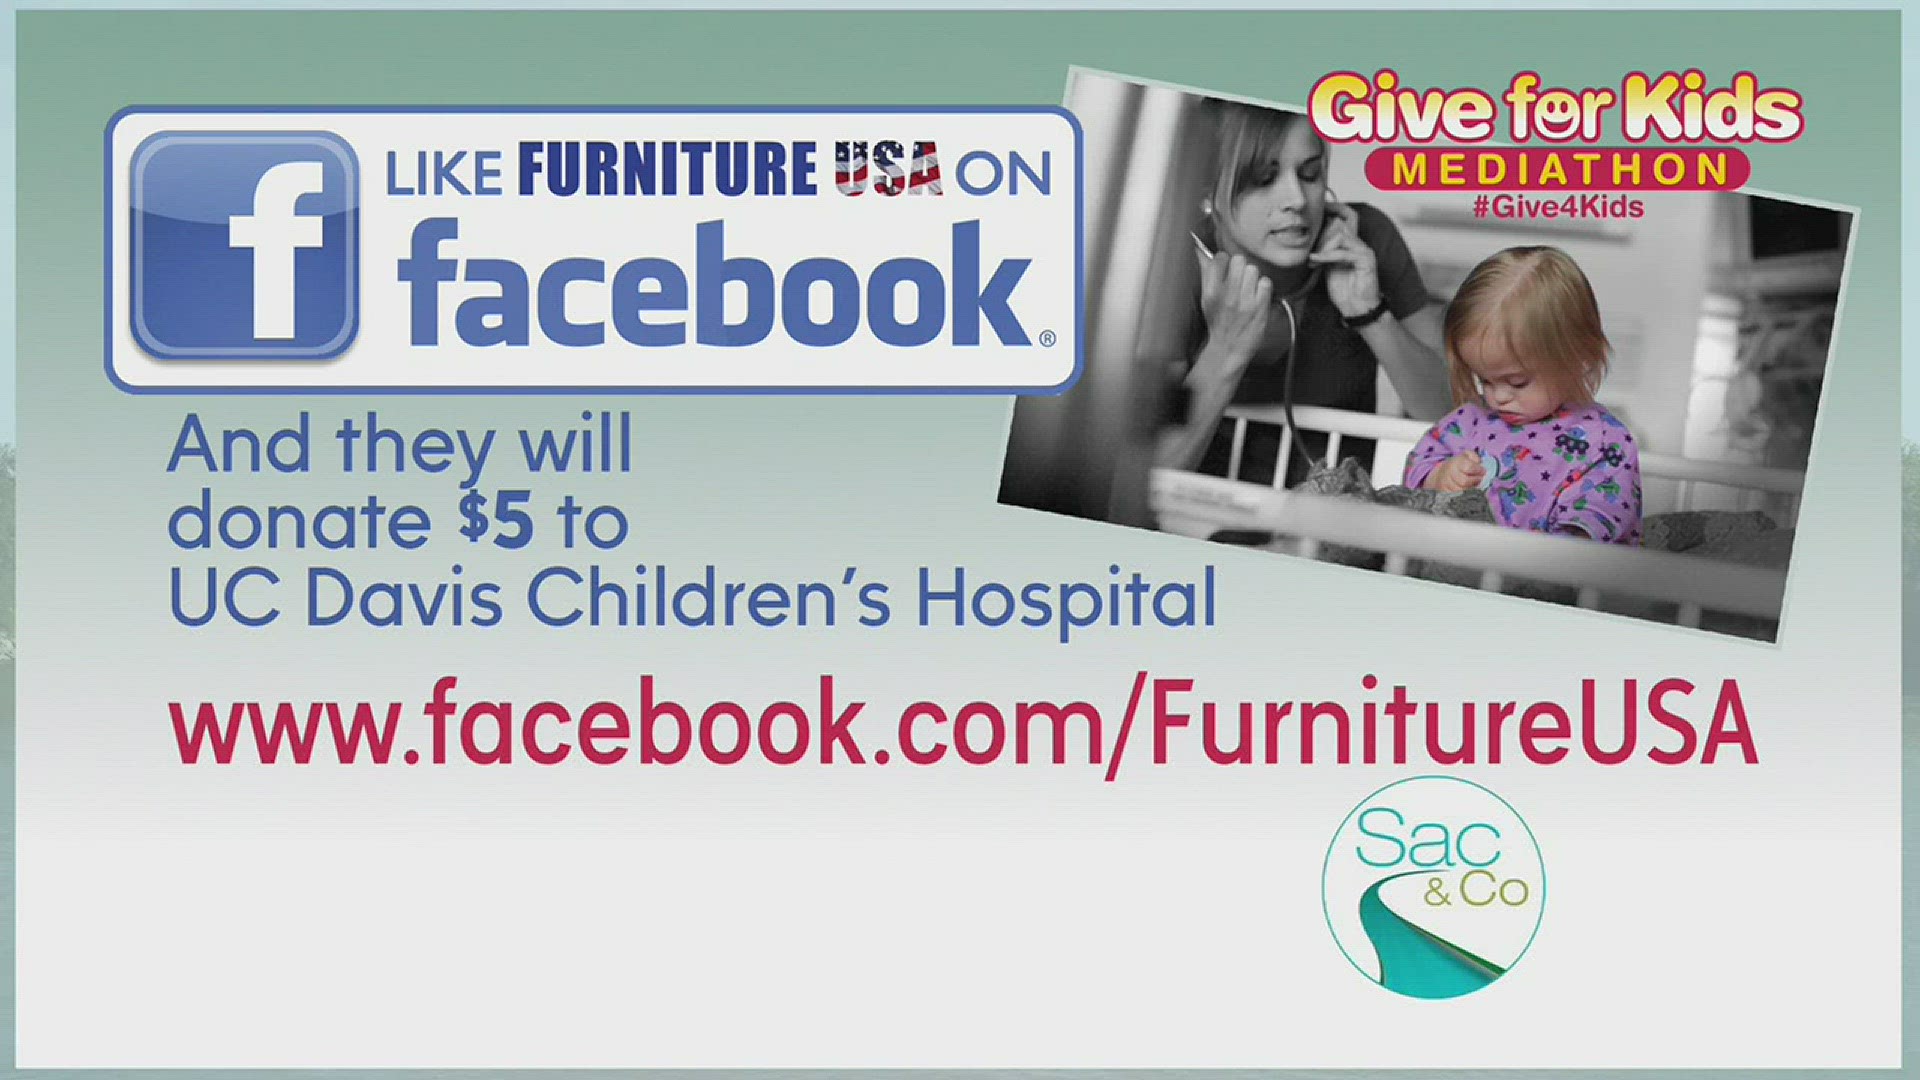 Find out why simply "liking" Furniture USA's Facebook page can help children at the UC Davis Children's Hospital!